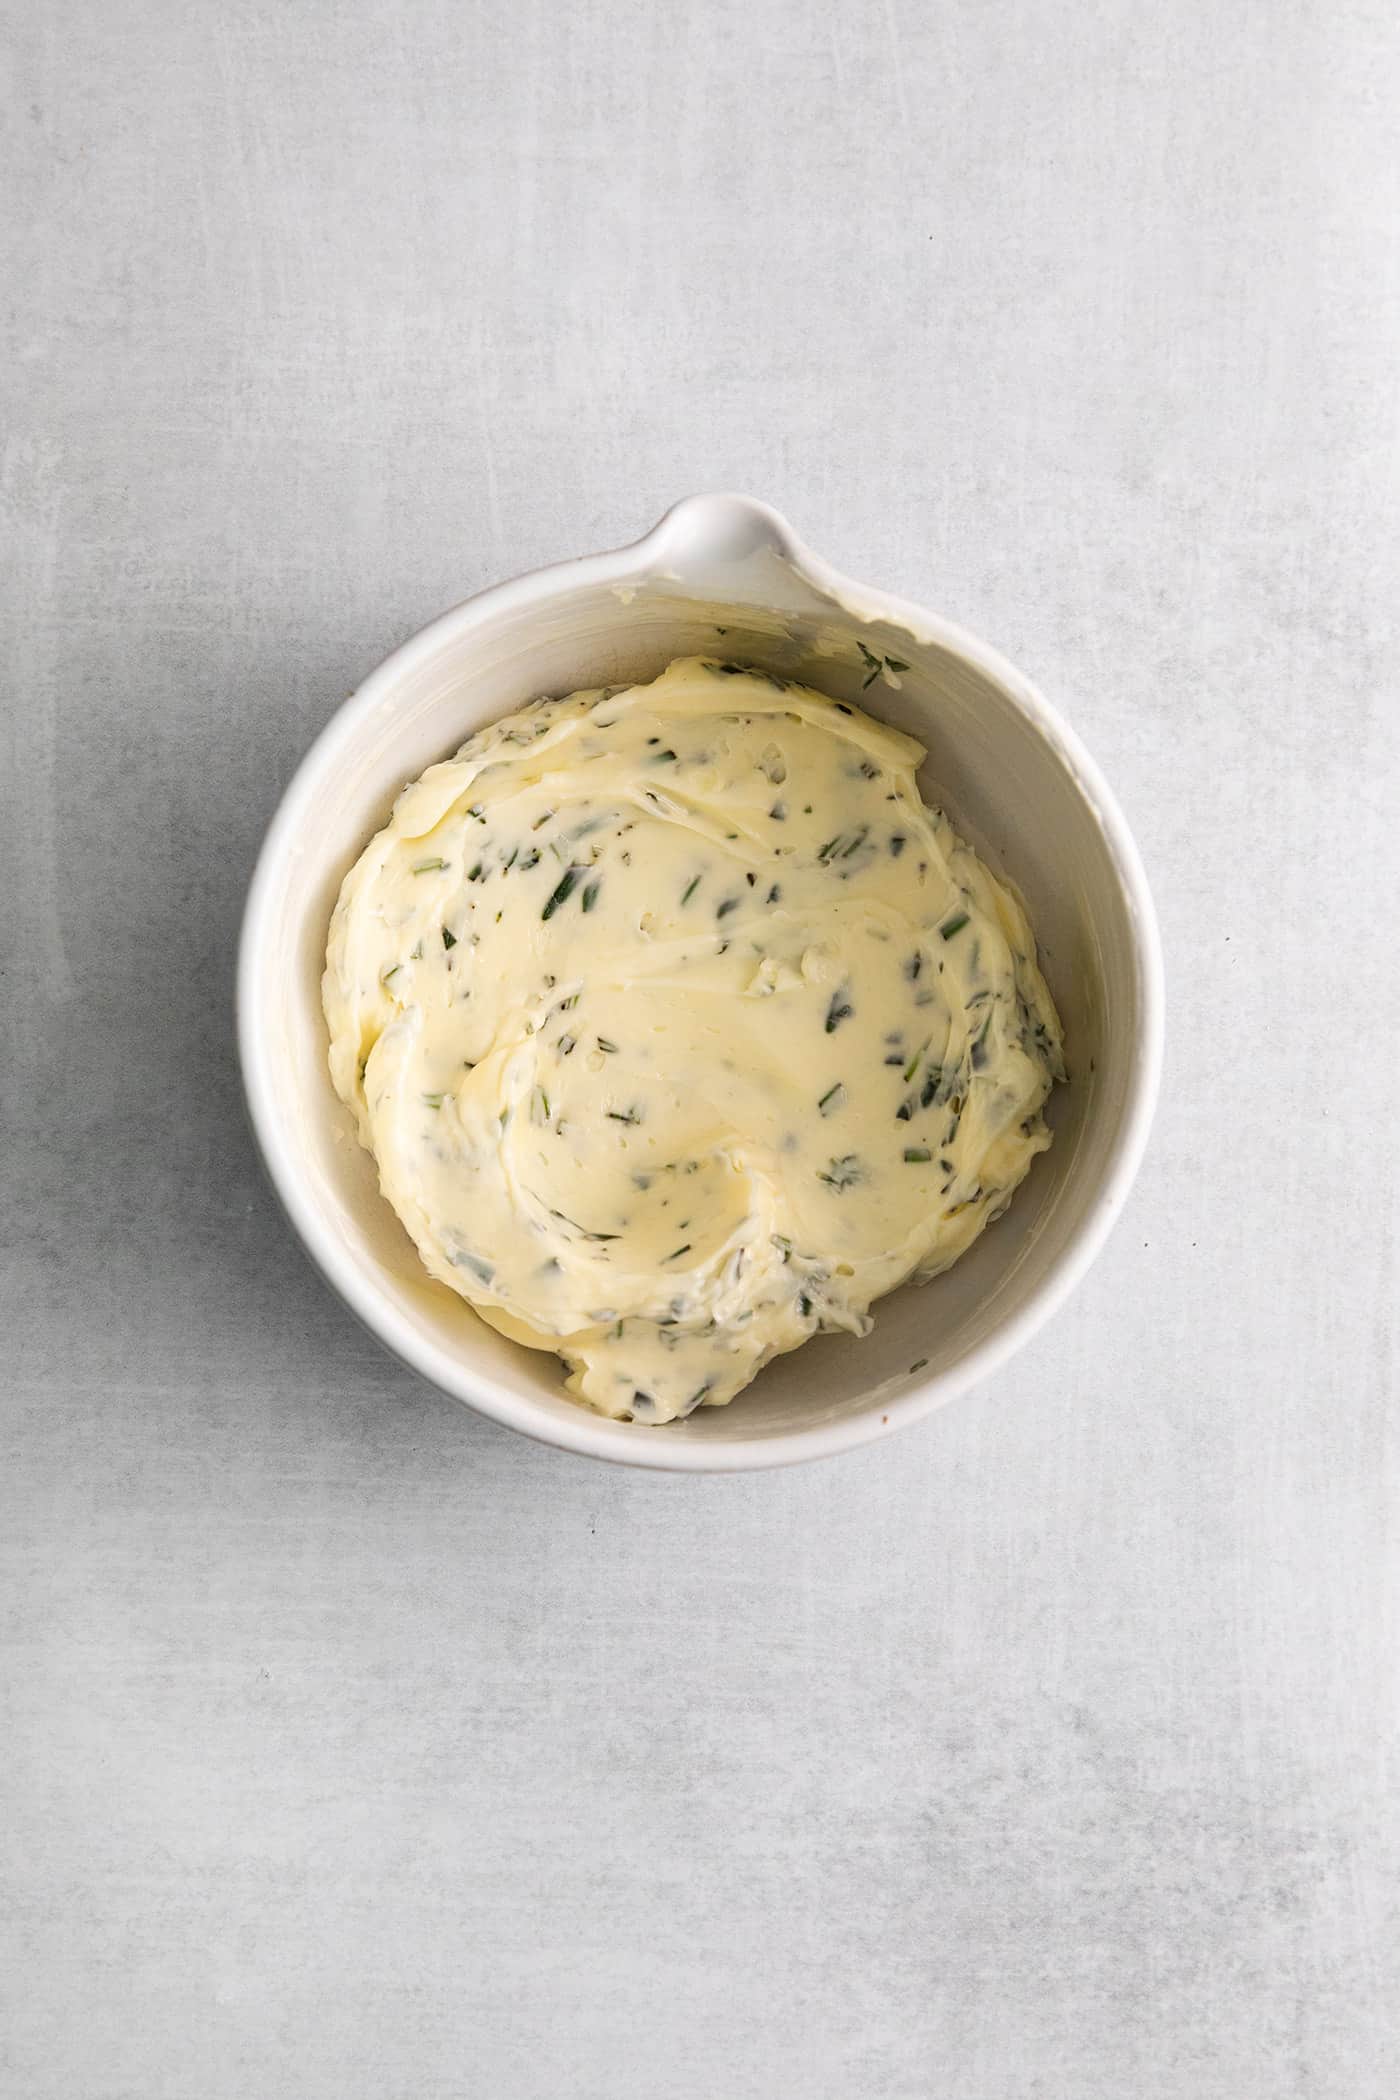 Herby compound butter in a white dish